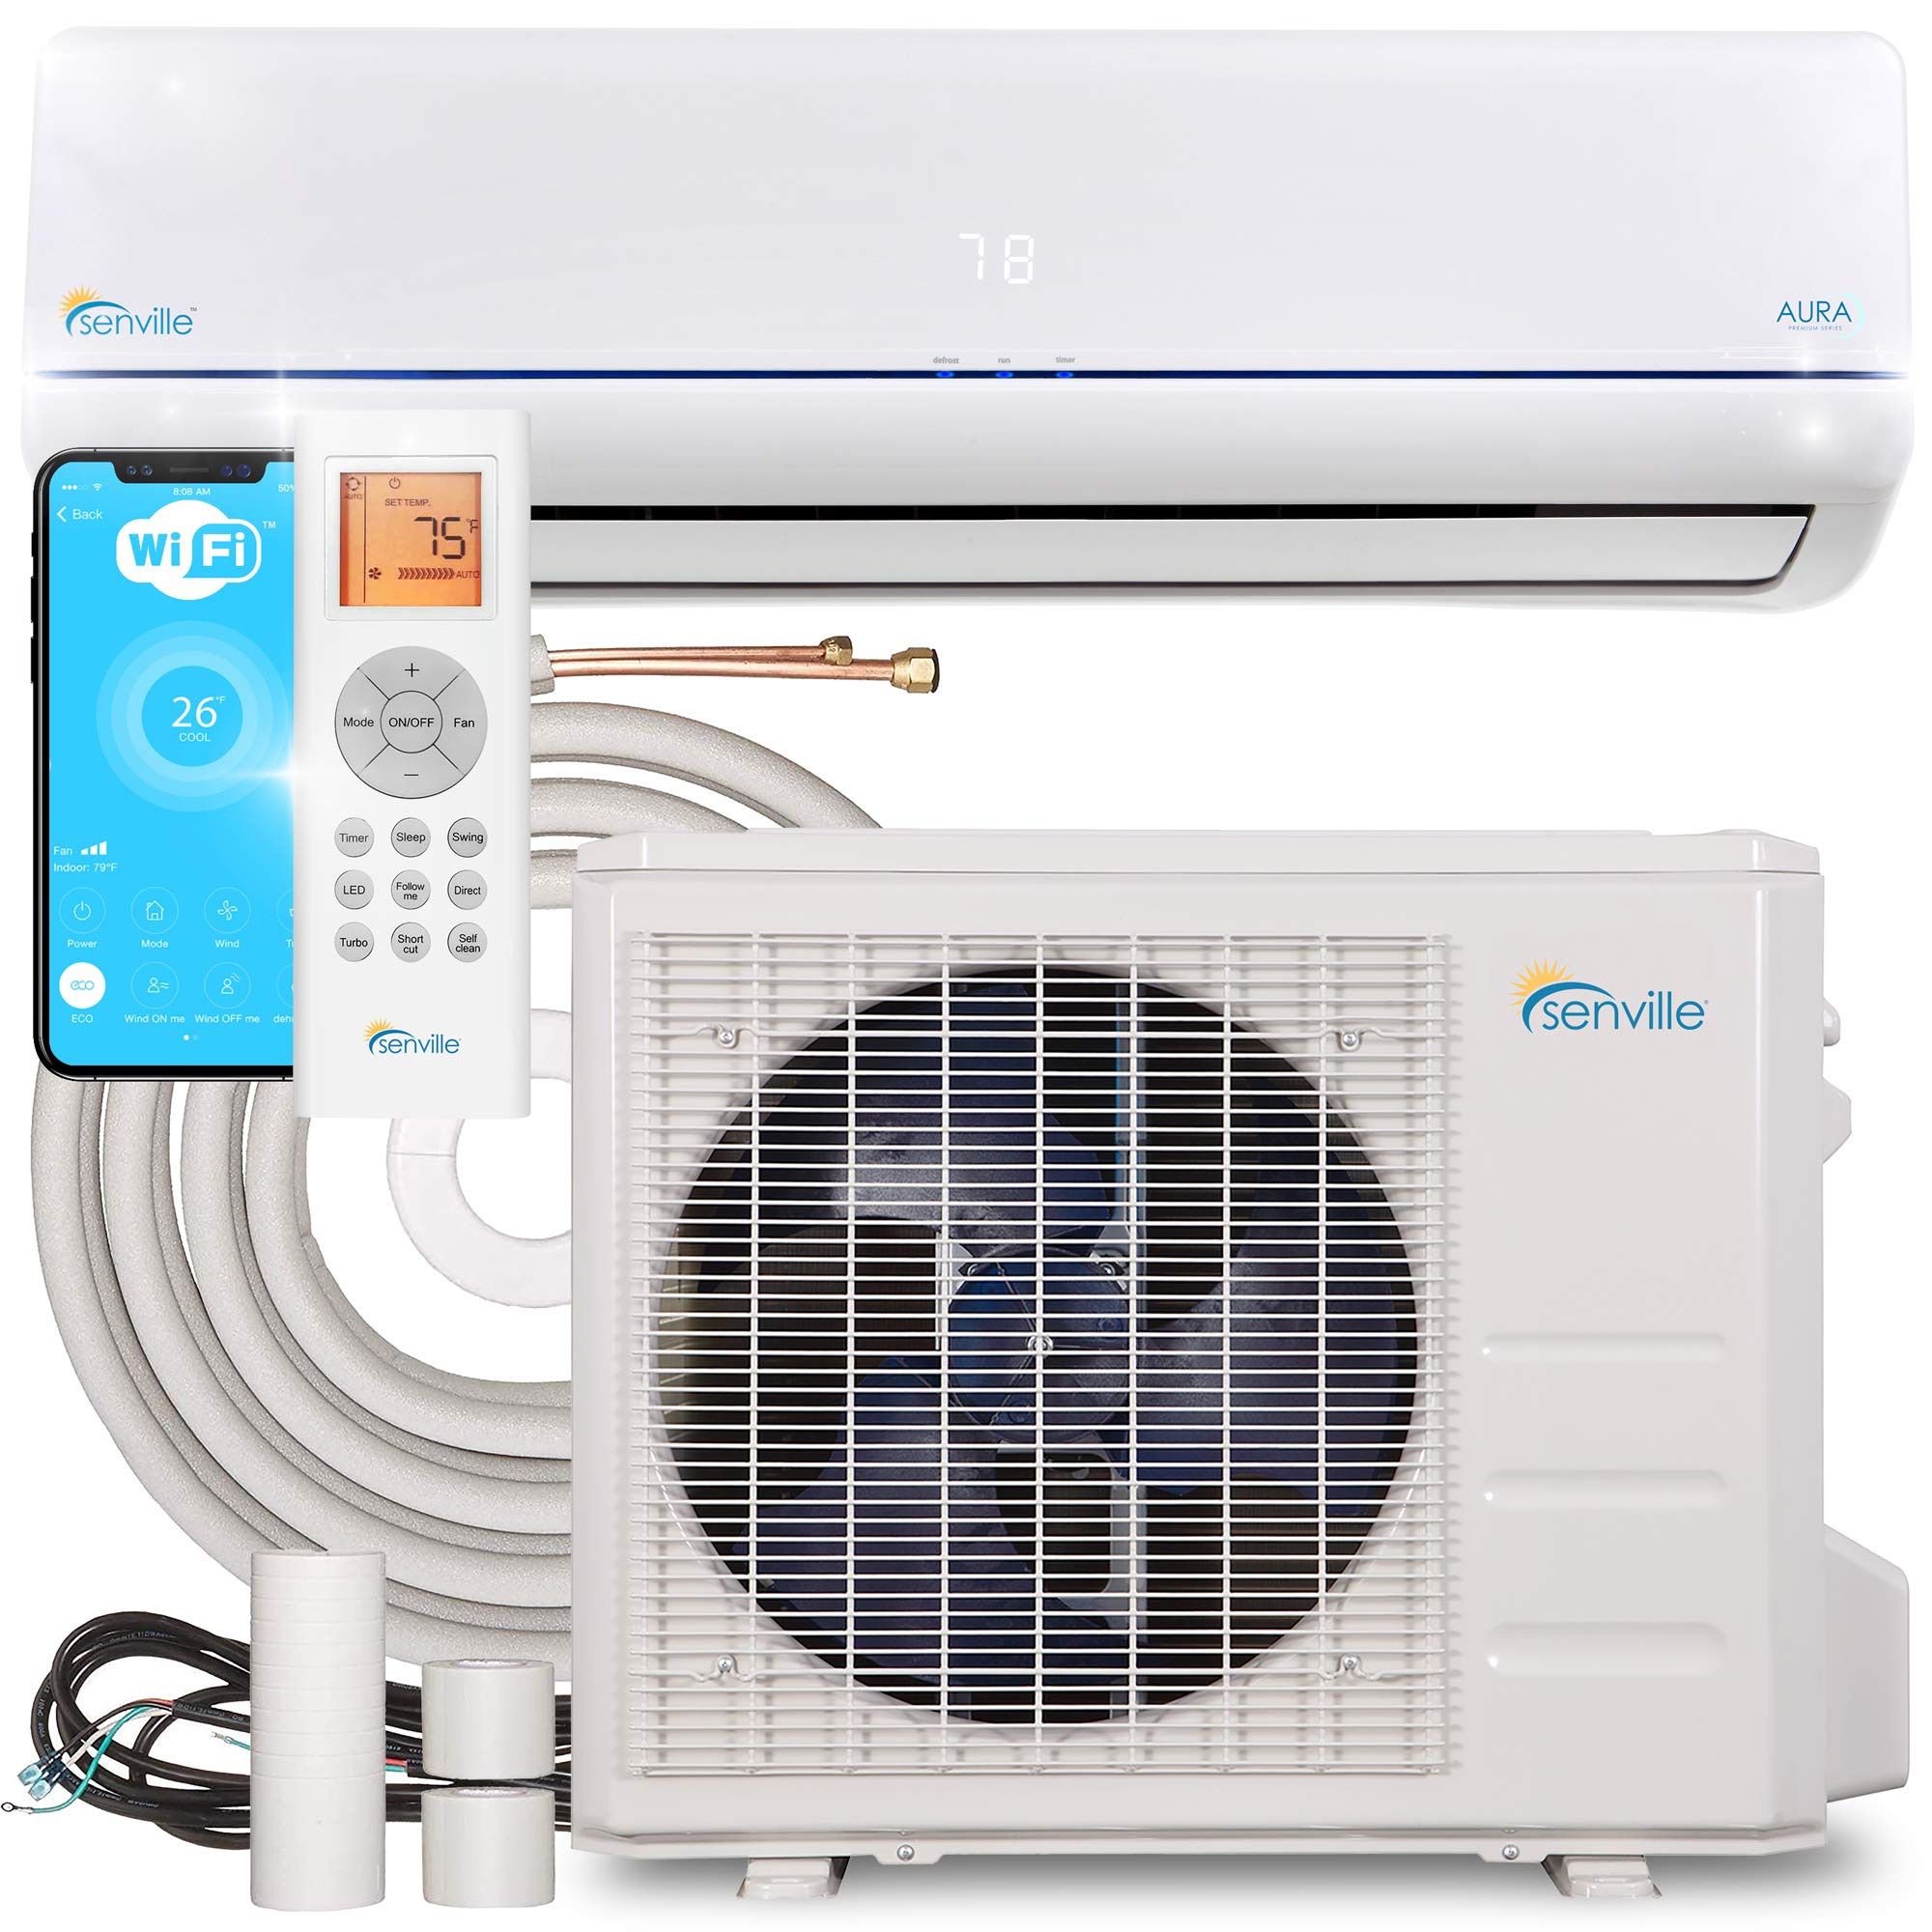 5-tips-you-need-to-choose-an-energy-efficient-ac-r-r-heating-and-air